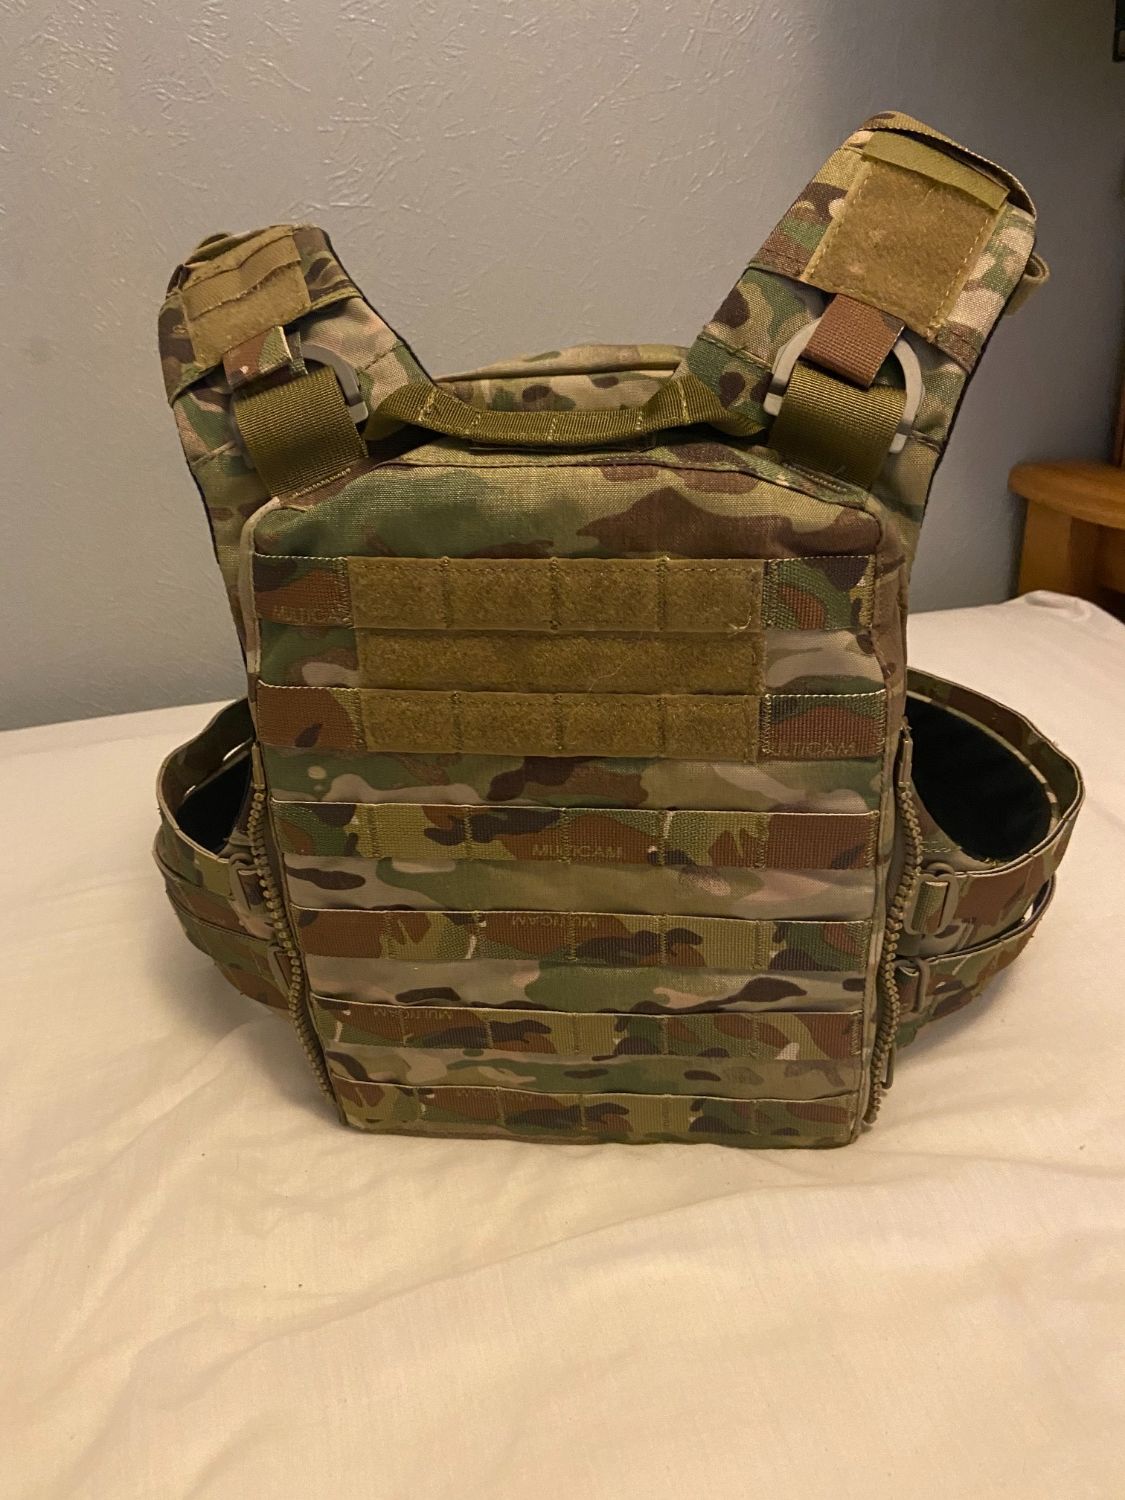 Spiritus LV119 Plate Carrier + more. - Gear - Airsoft Forums UK